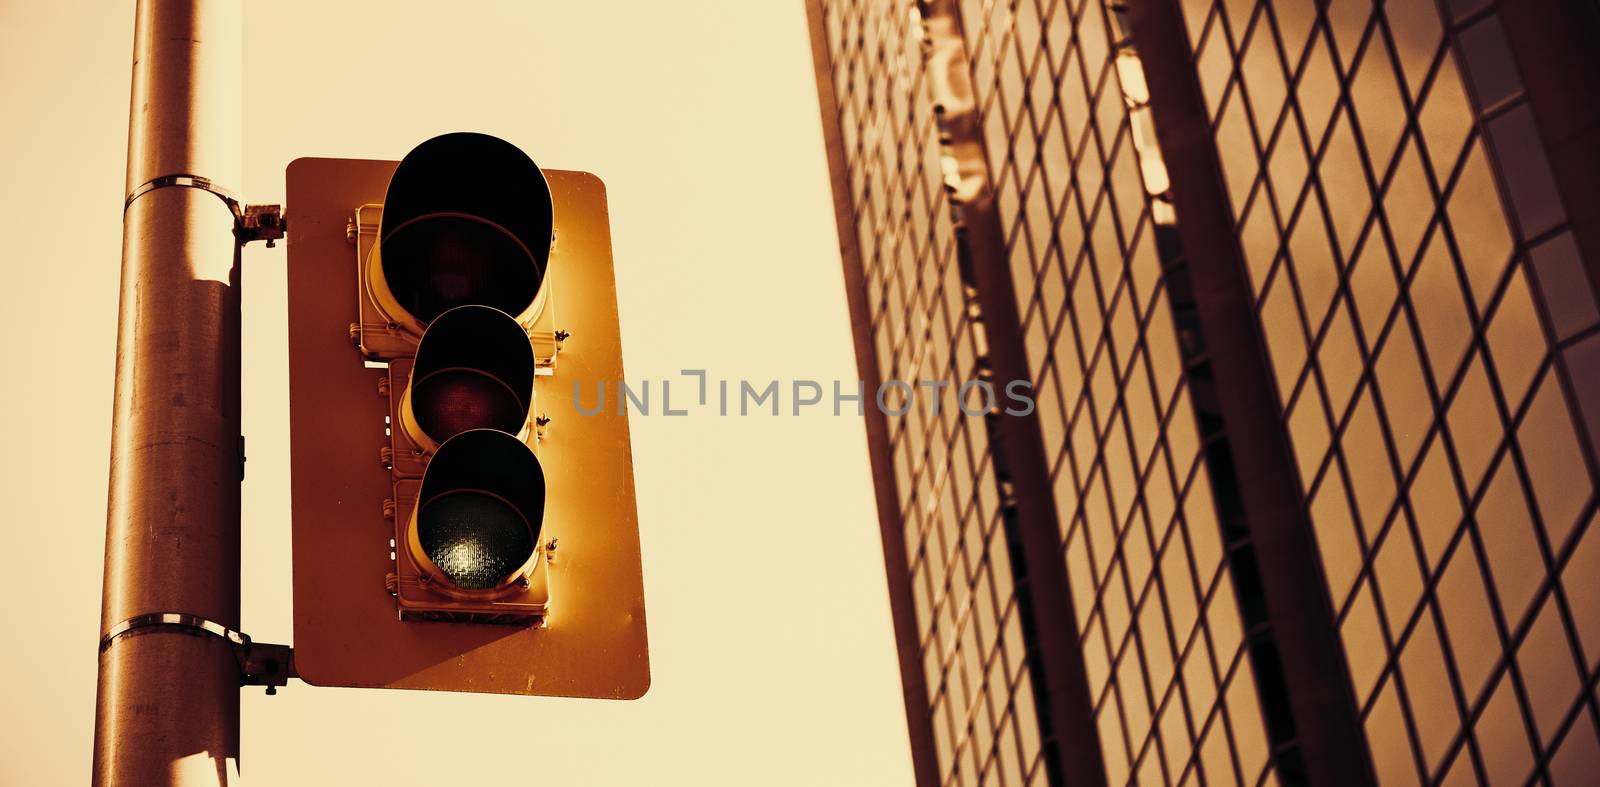 Traffic light with office in the background  by Wavebreakmedia